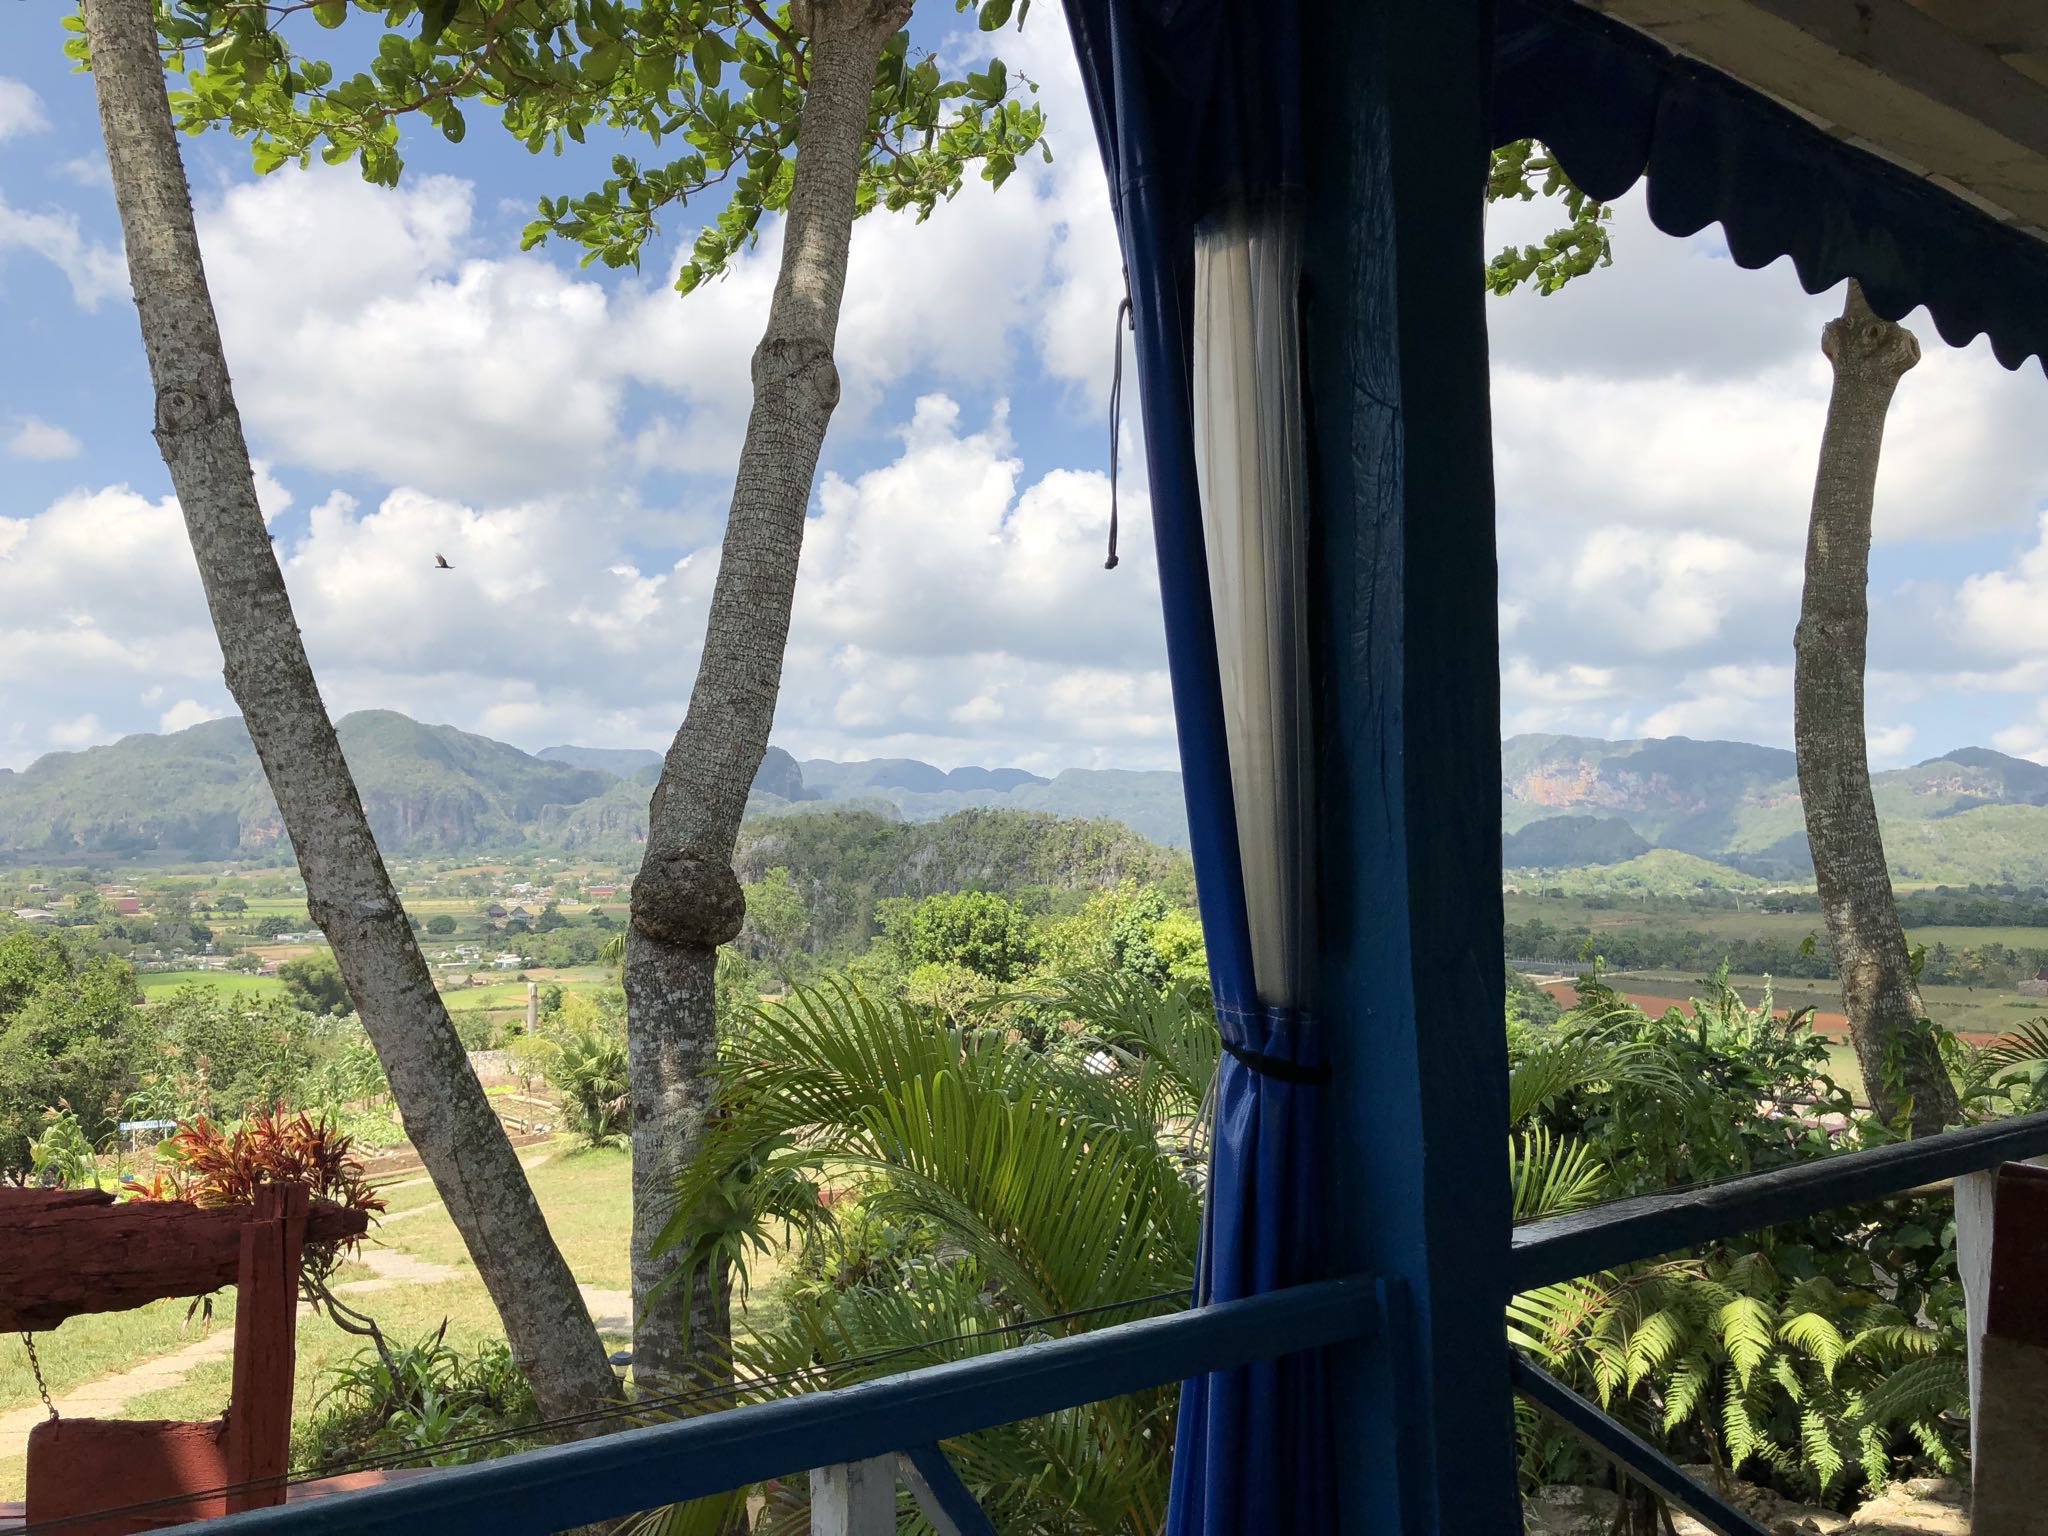 Photo 169 of 221 from the album Highlights Cuba 2019.